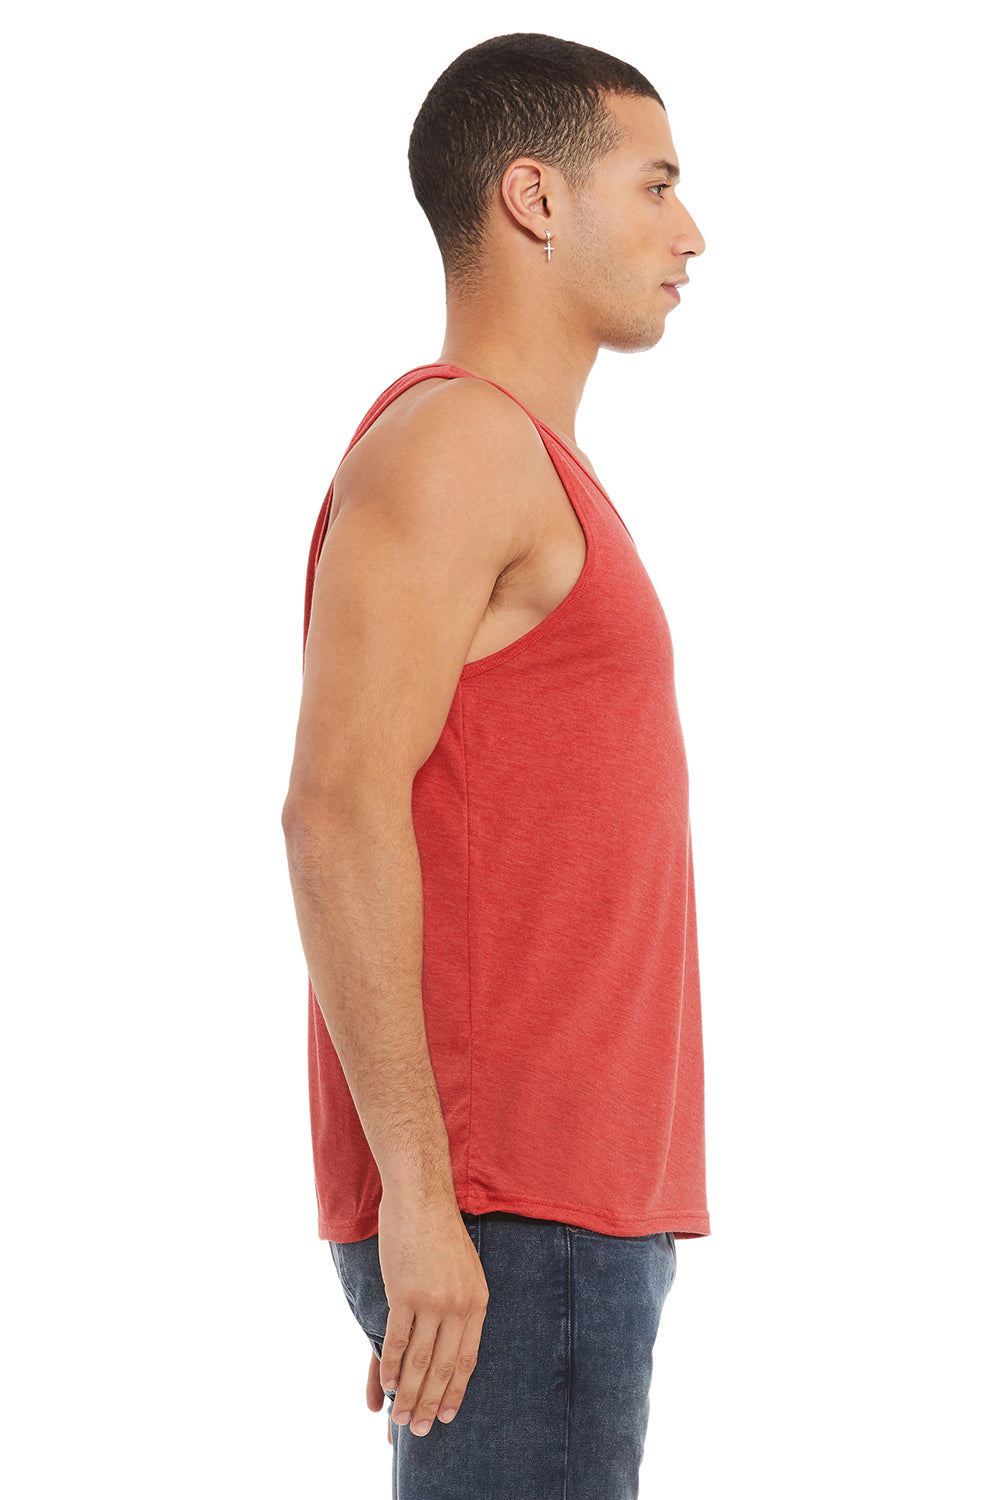 Bella + Canvas BC3480/3480 Mens Jersey Tank Top Red Triblend Model Side